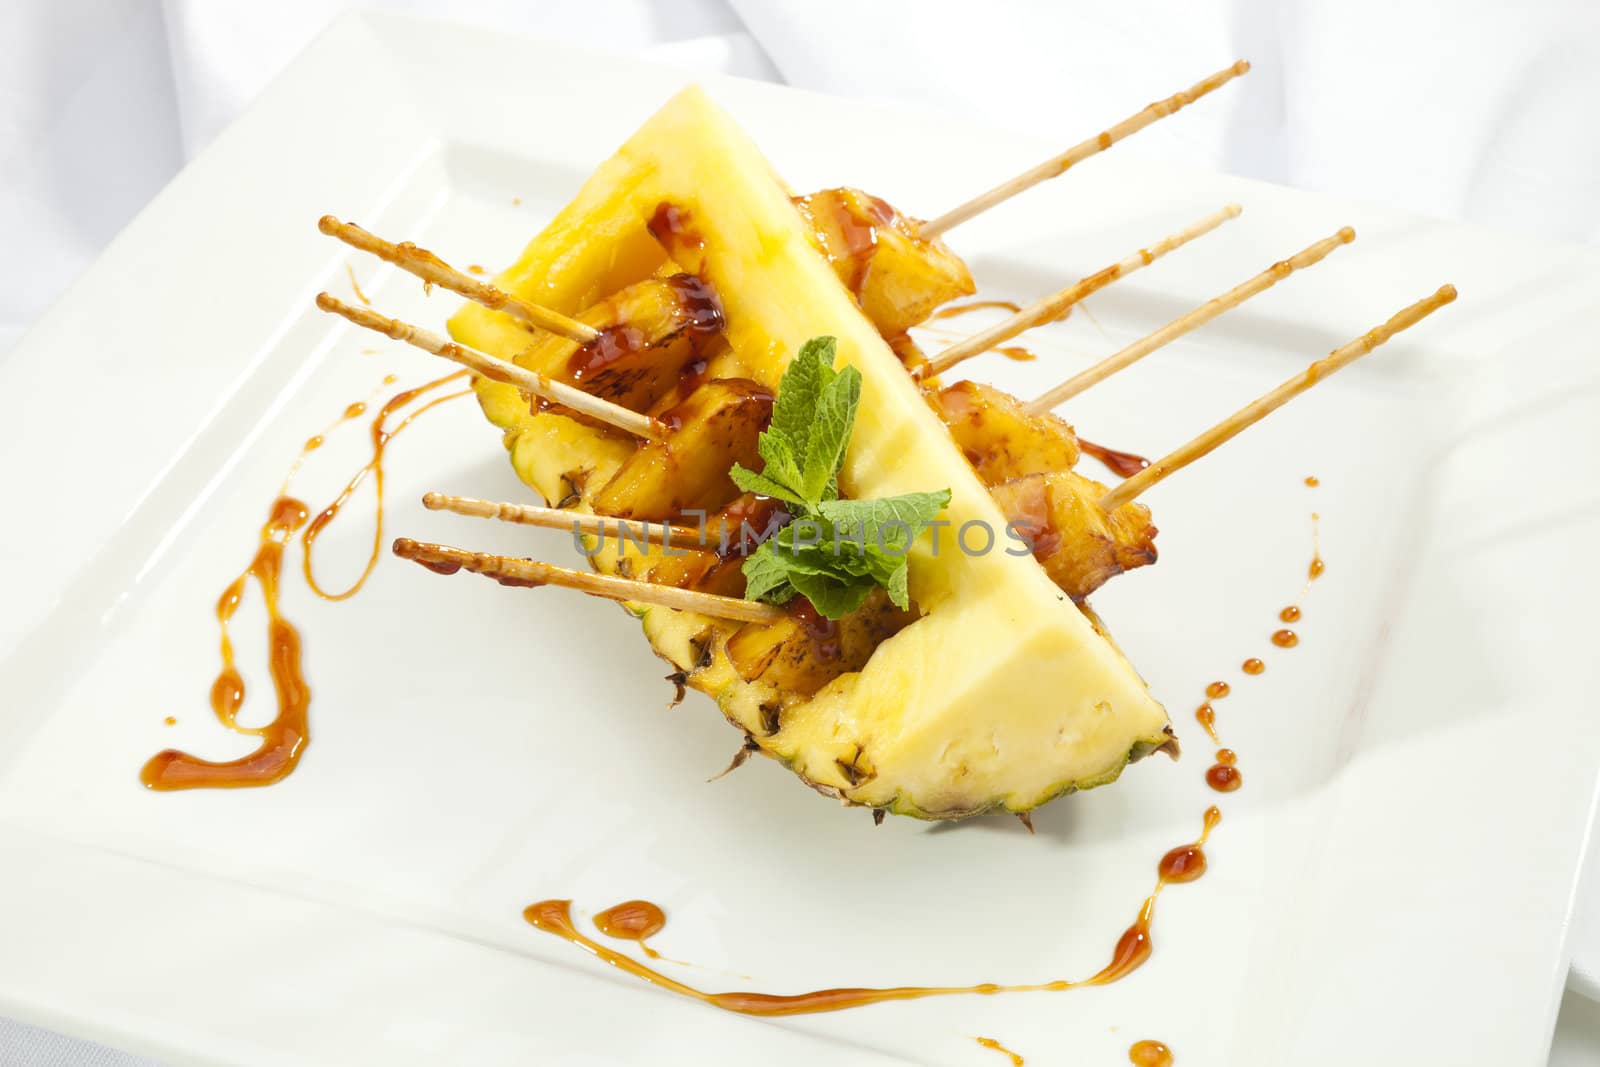 Grilled pineapple with honey by hanusst